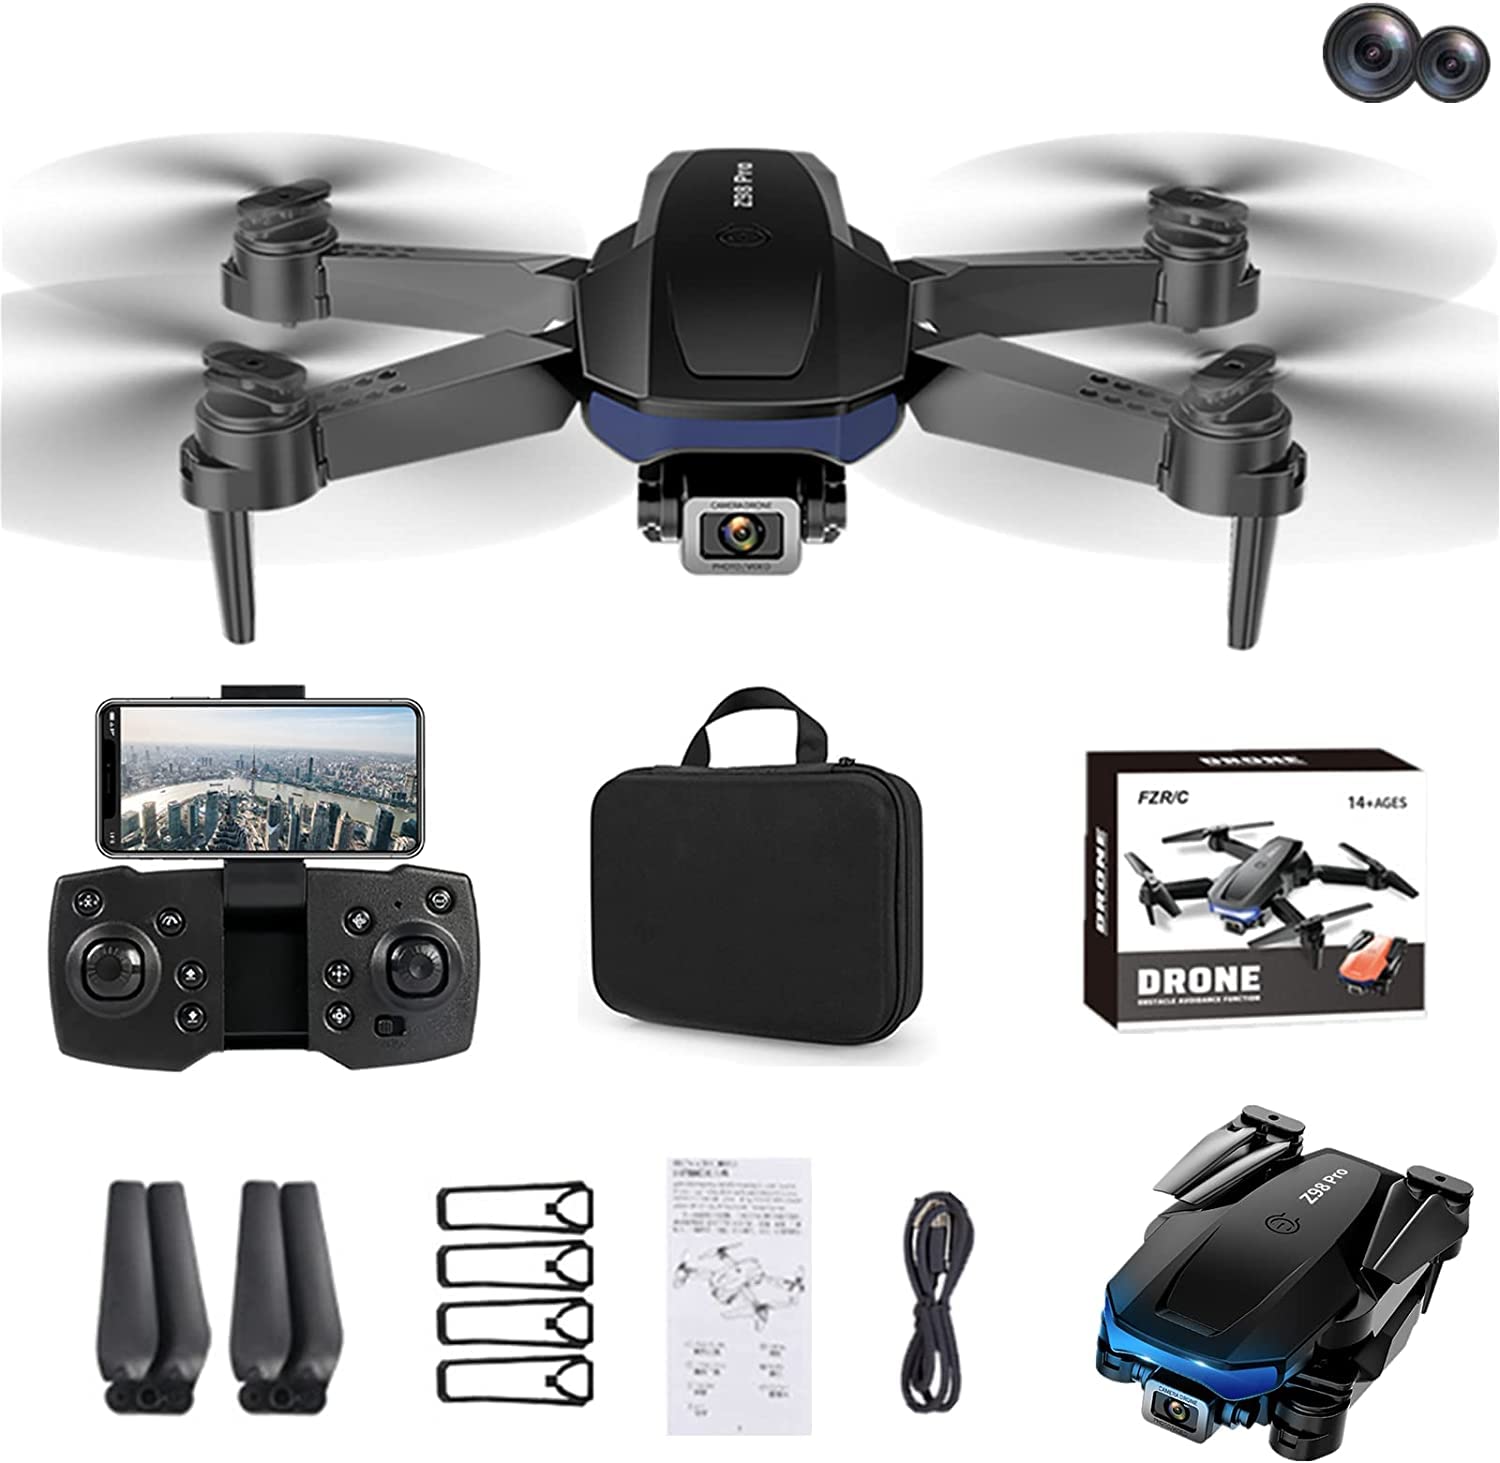 2022 Z98 Pro Upgraded Wifi Drone with 1080P Dual HD Camera, Foldable RC Quadcopter Drone WiFi FPV Drone for Kids Beginner, Altitude Hold, One Key Take Off/Landing, 3D Flip